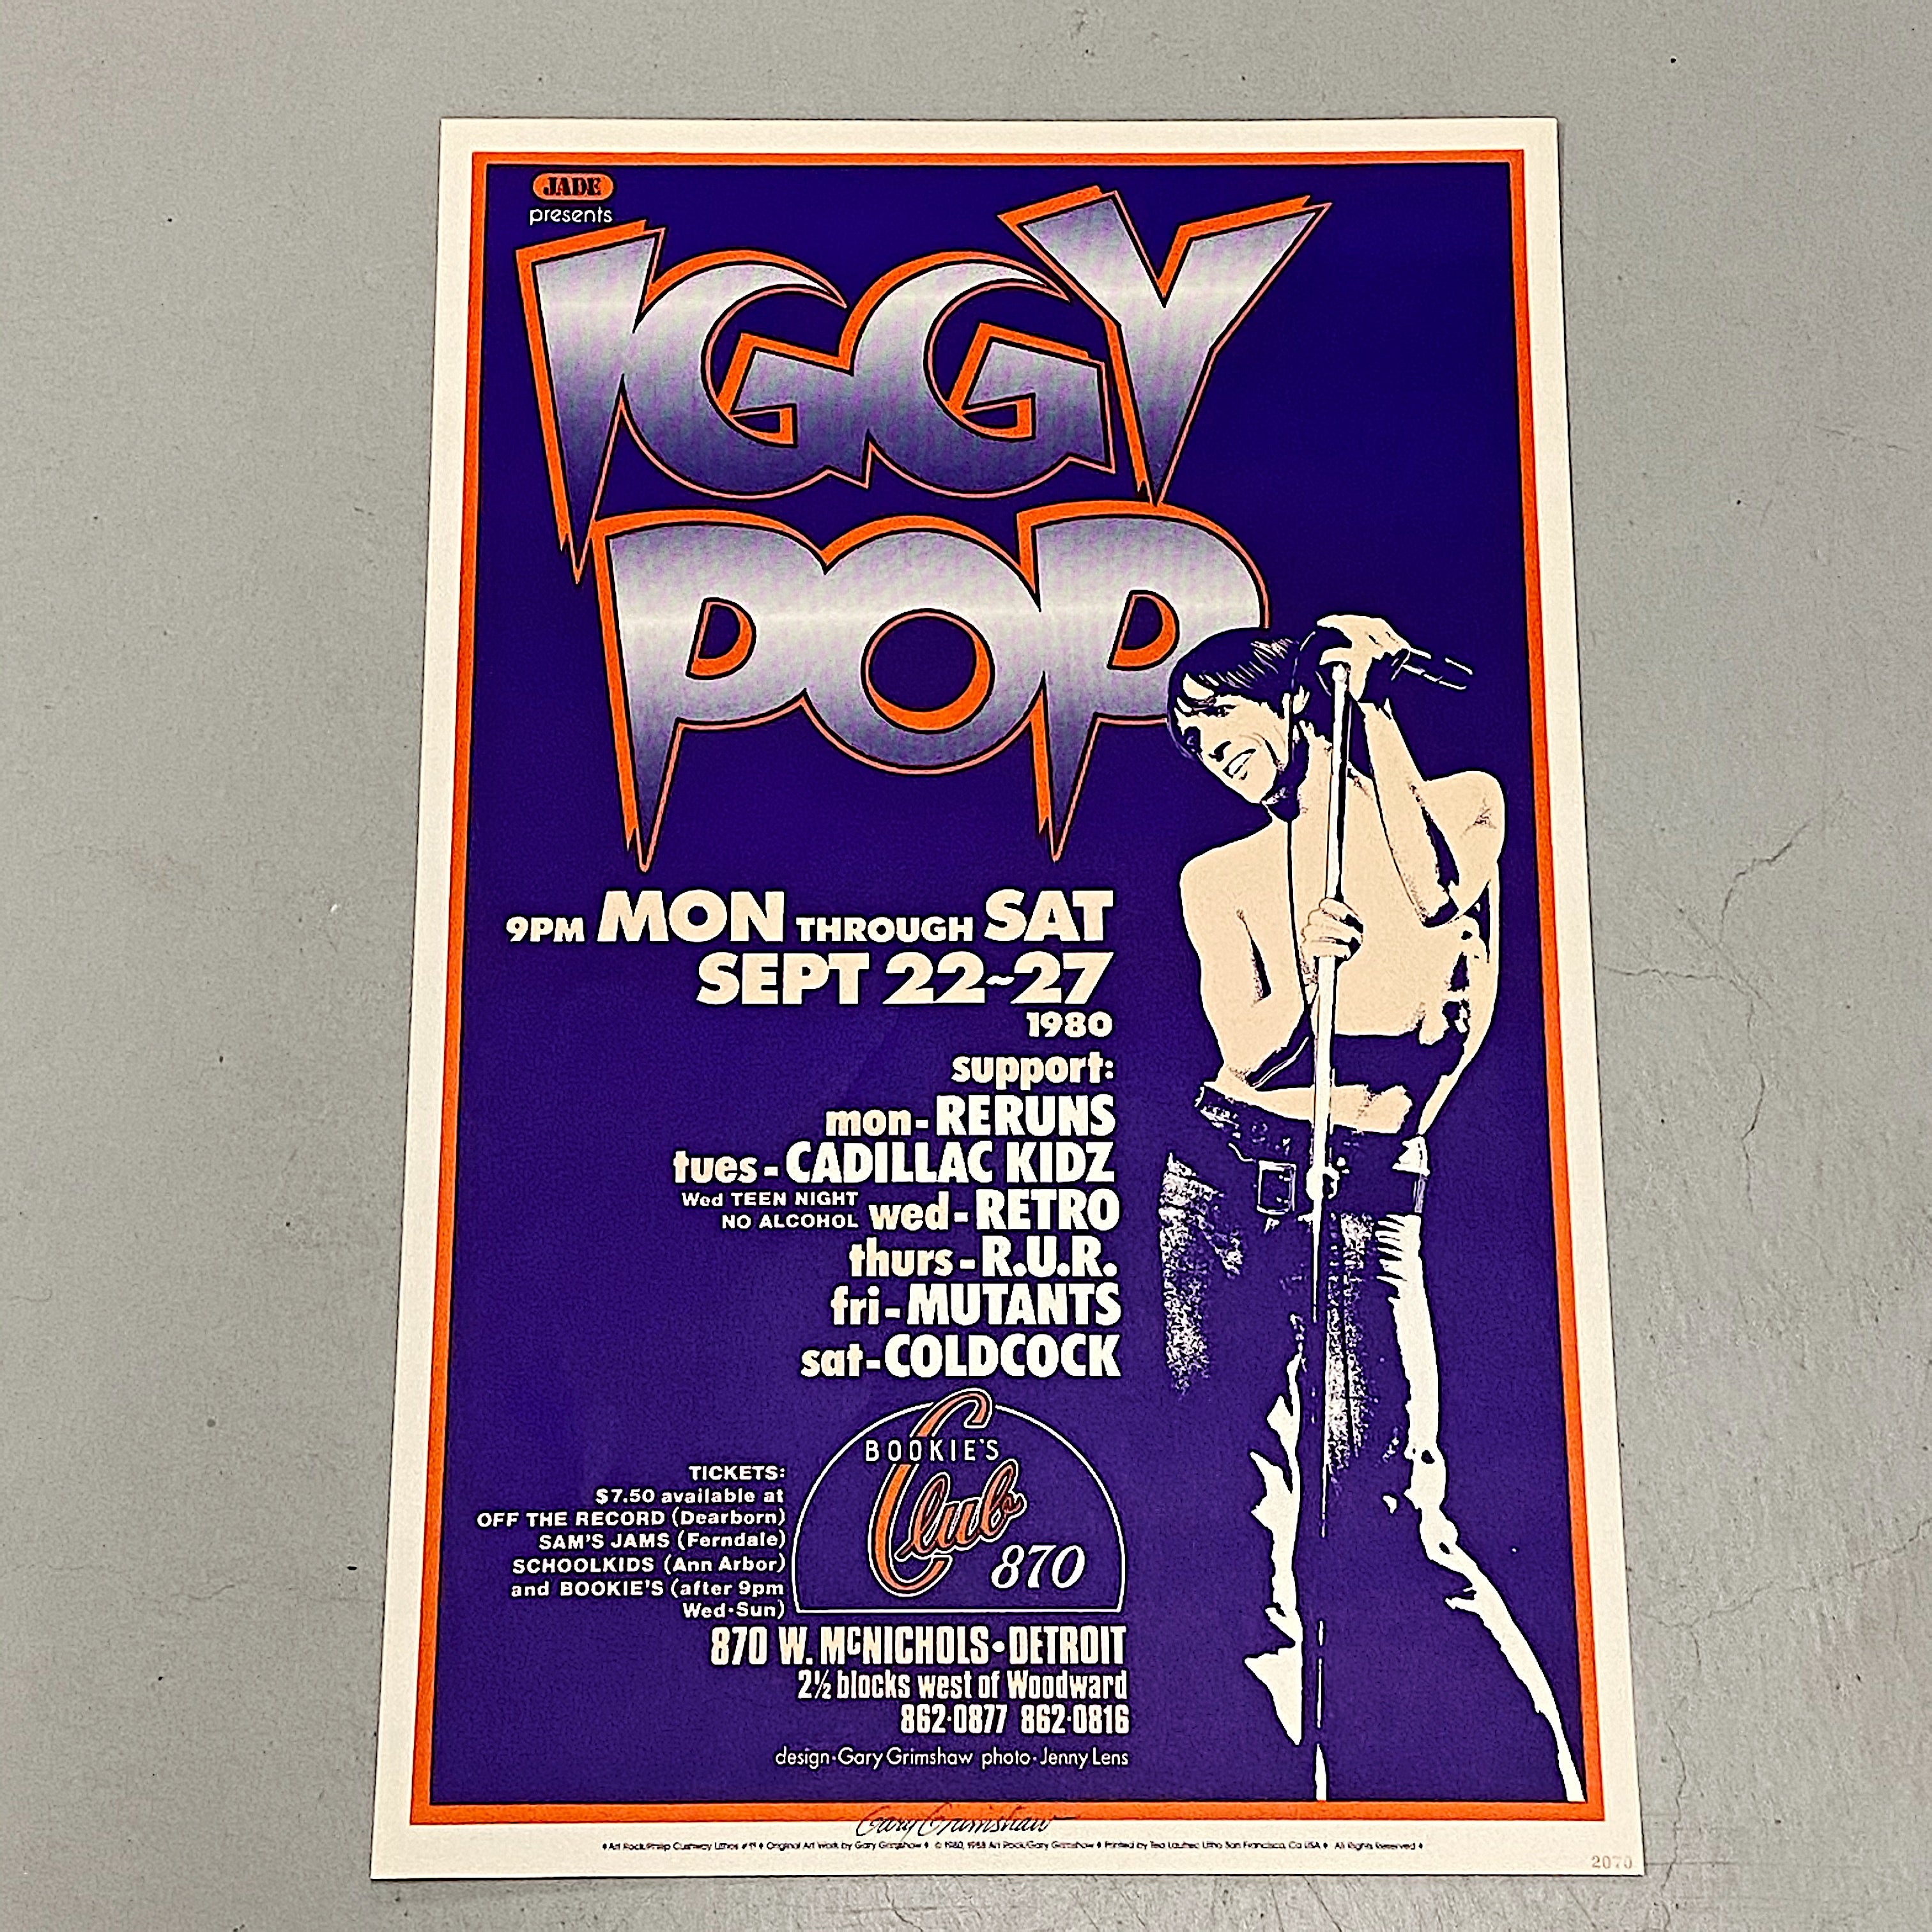 Rare Iggy Pop Concert Poster by Gary Grimshaw - Artist Signed Print 1988 - Bookie's Club Detroit - 28 x 18 - 1980s Rock Posters - Limited Edition